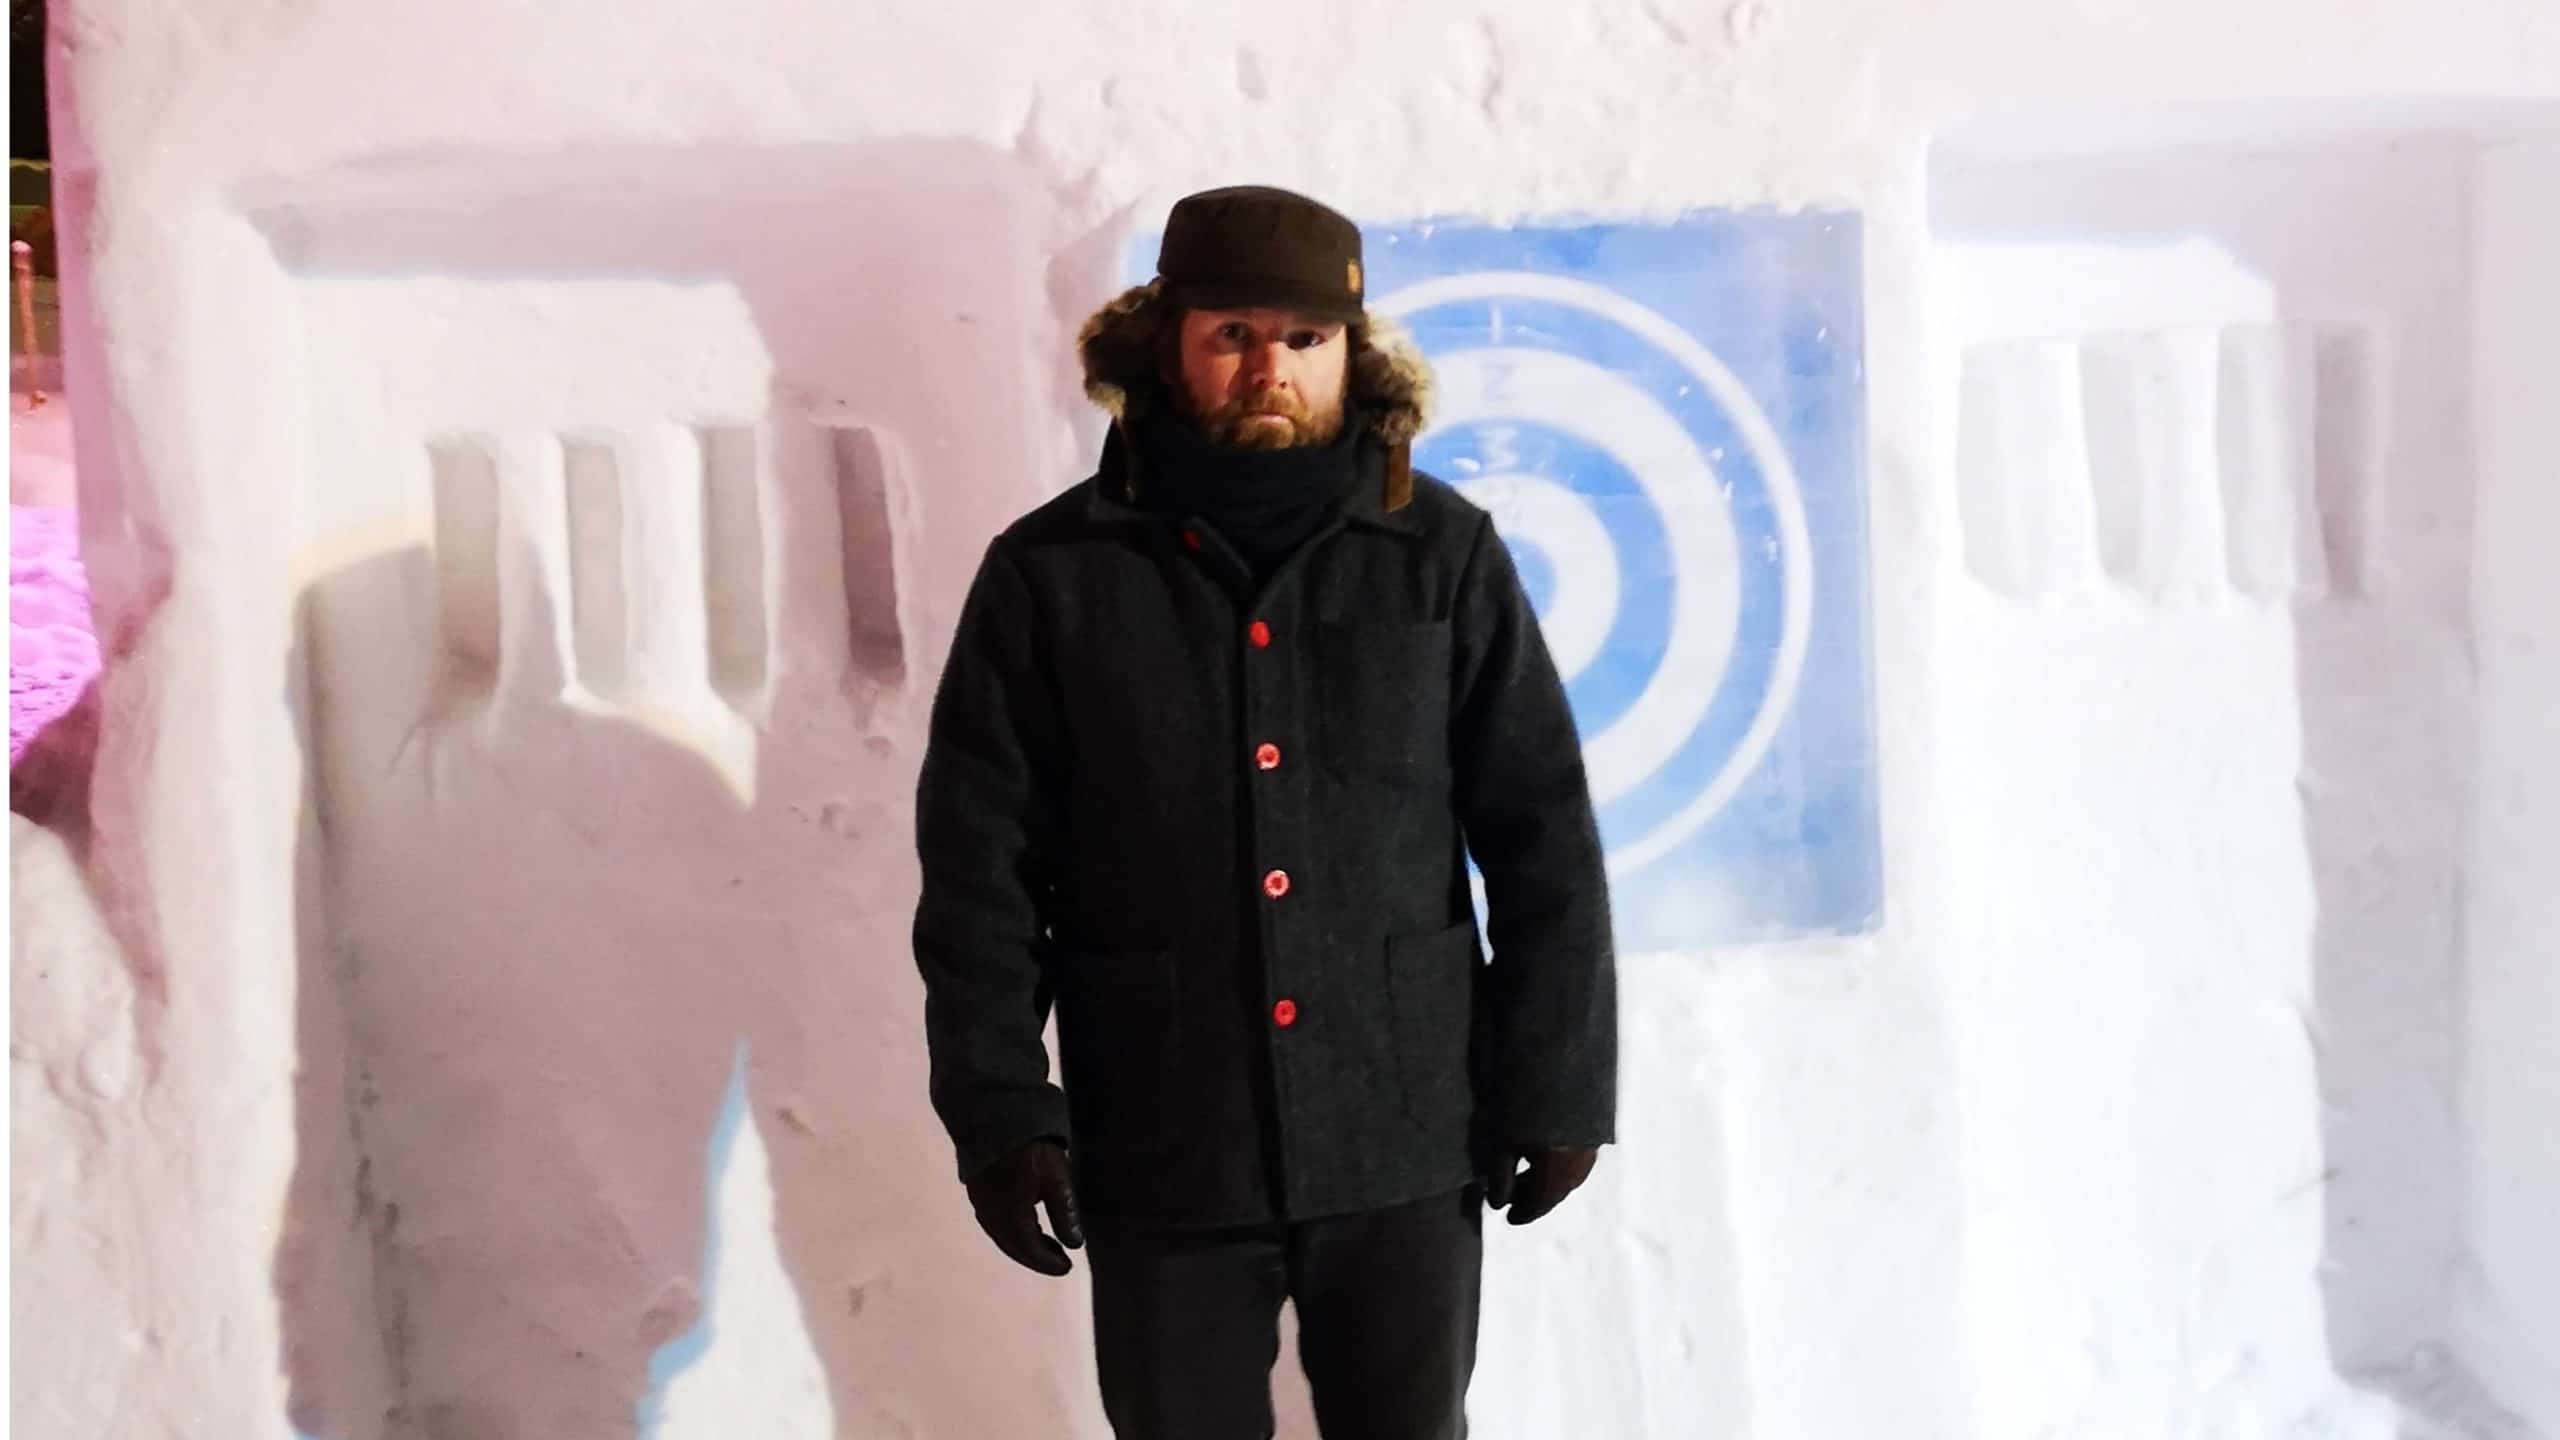 Eric Boyd wearing black winter clothes in front of a snow sculpture